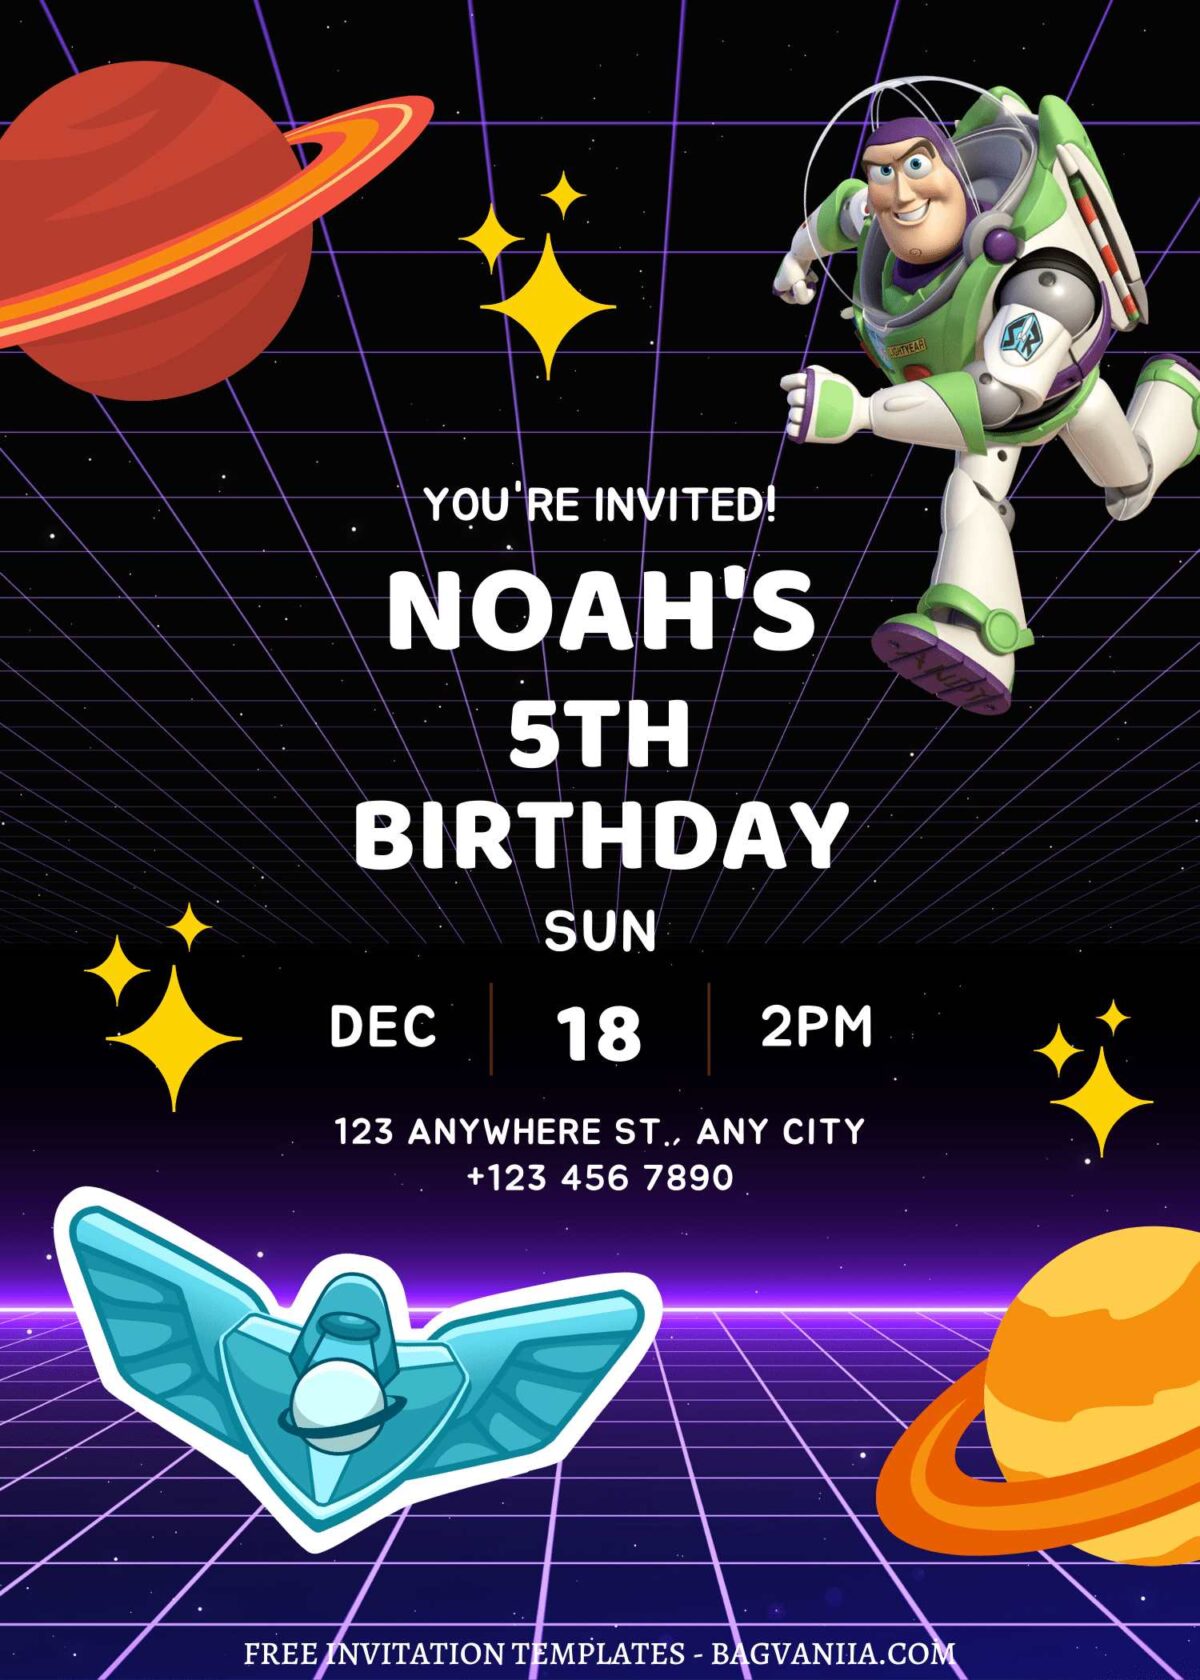 FREE EDITABLE - 8+ Space Ranger Buzz Canva Birthday Invitation Templates  with space background